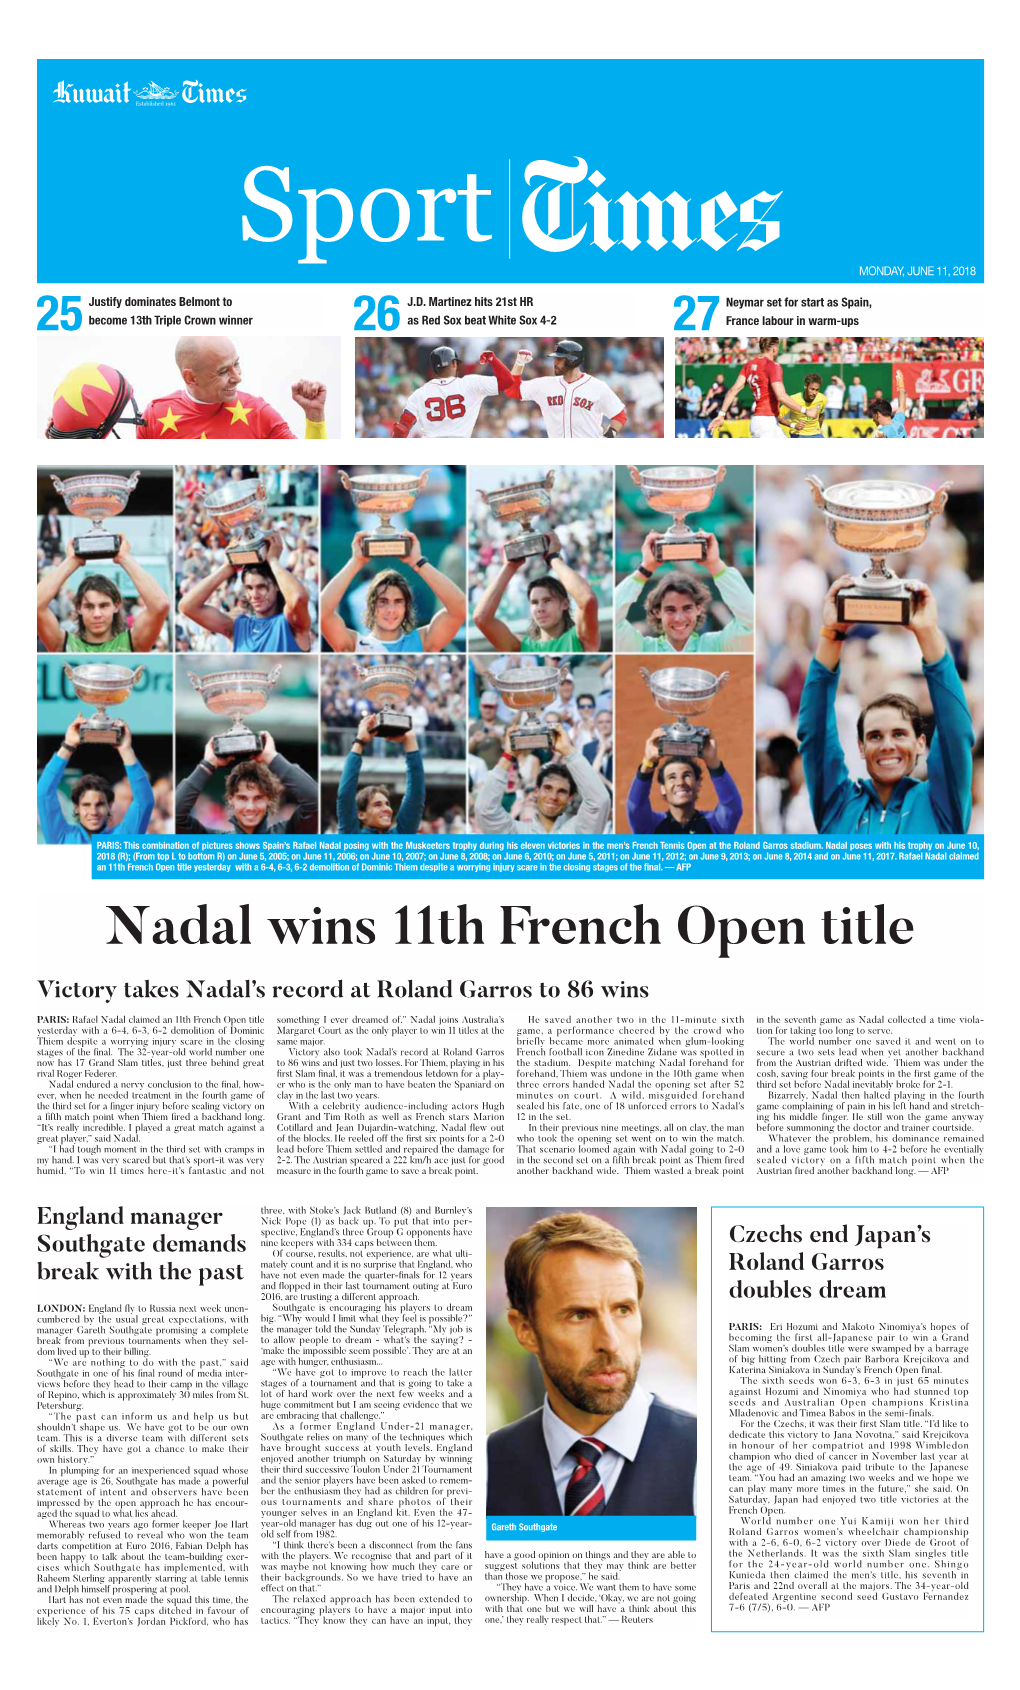 Nadal Wins 11Th French Open Title Victory Takes Nadal’S Record at Roland Garros to 86 Wins